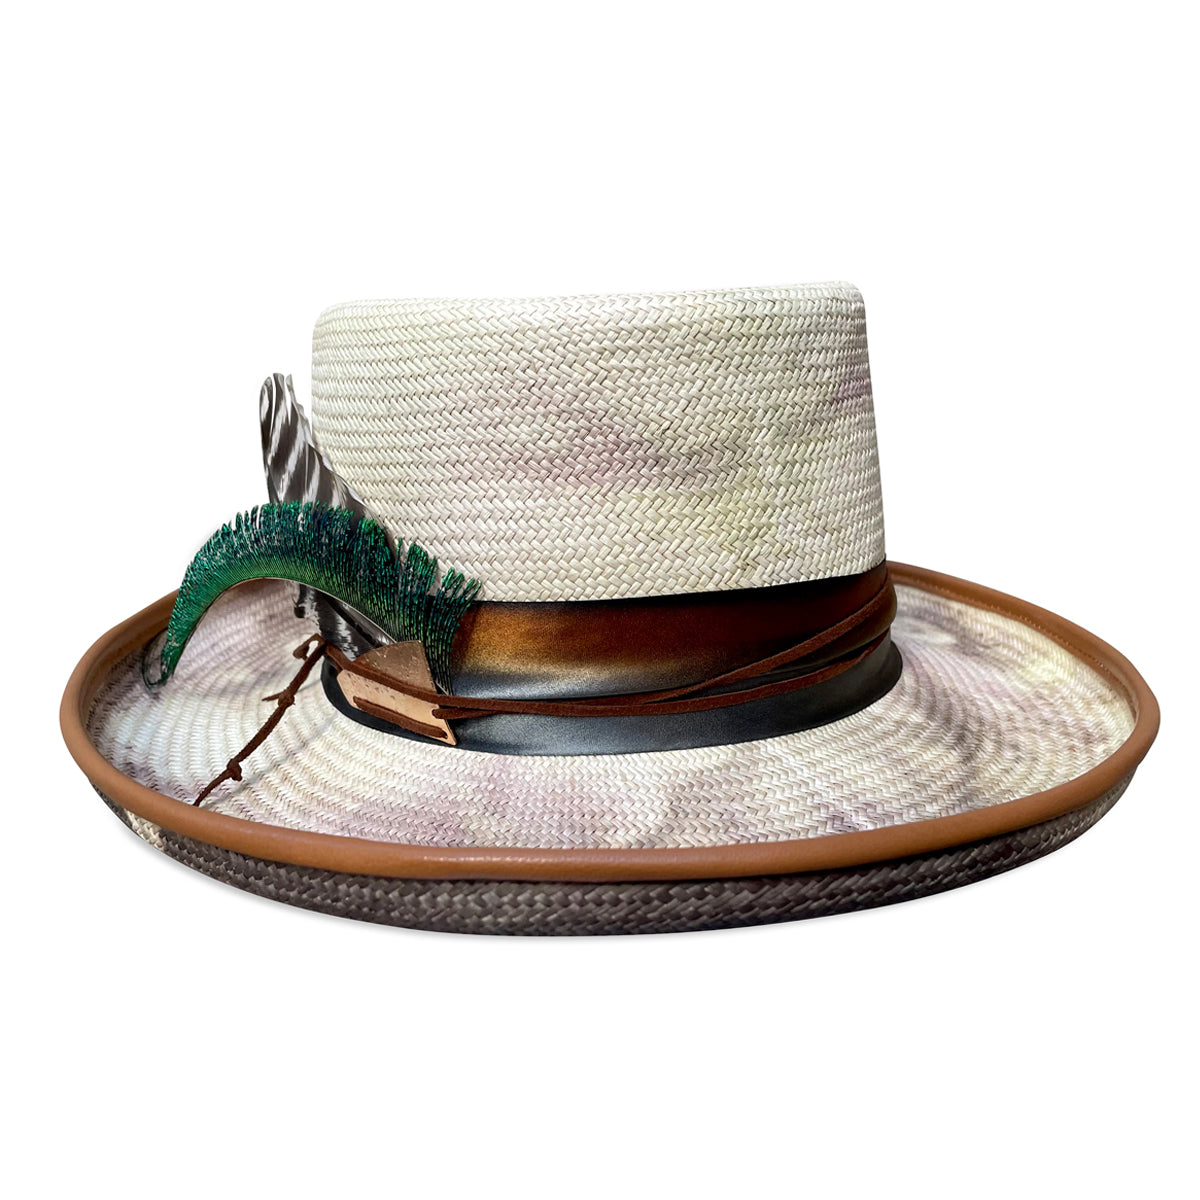 The 'Cha Cha' hat featuring a tie-dye design, a gently upturned brim for flattering contours, and bohemian-style silk and suede decorations.